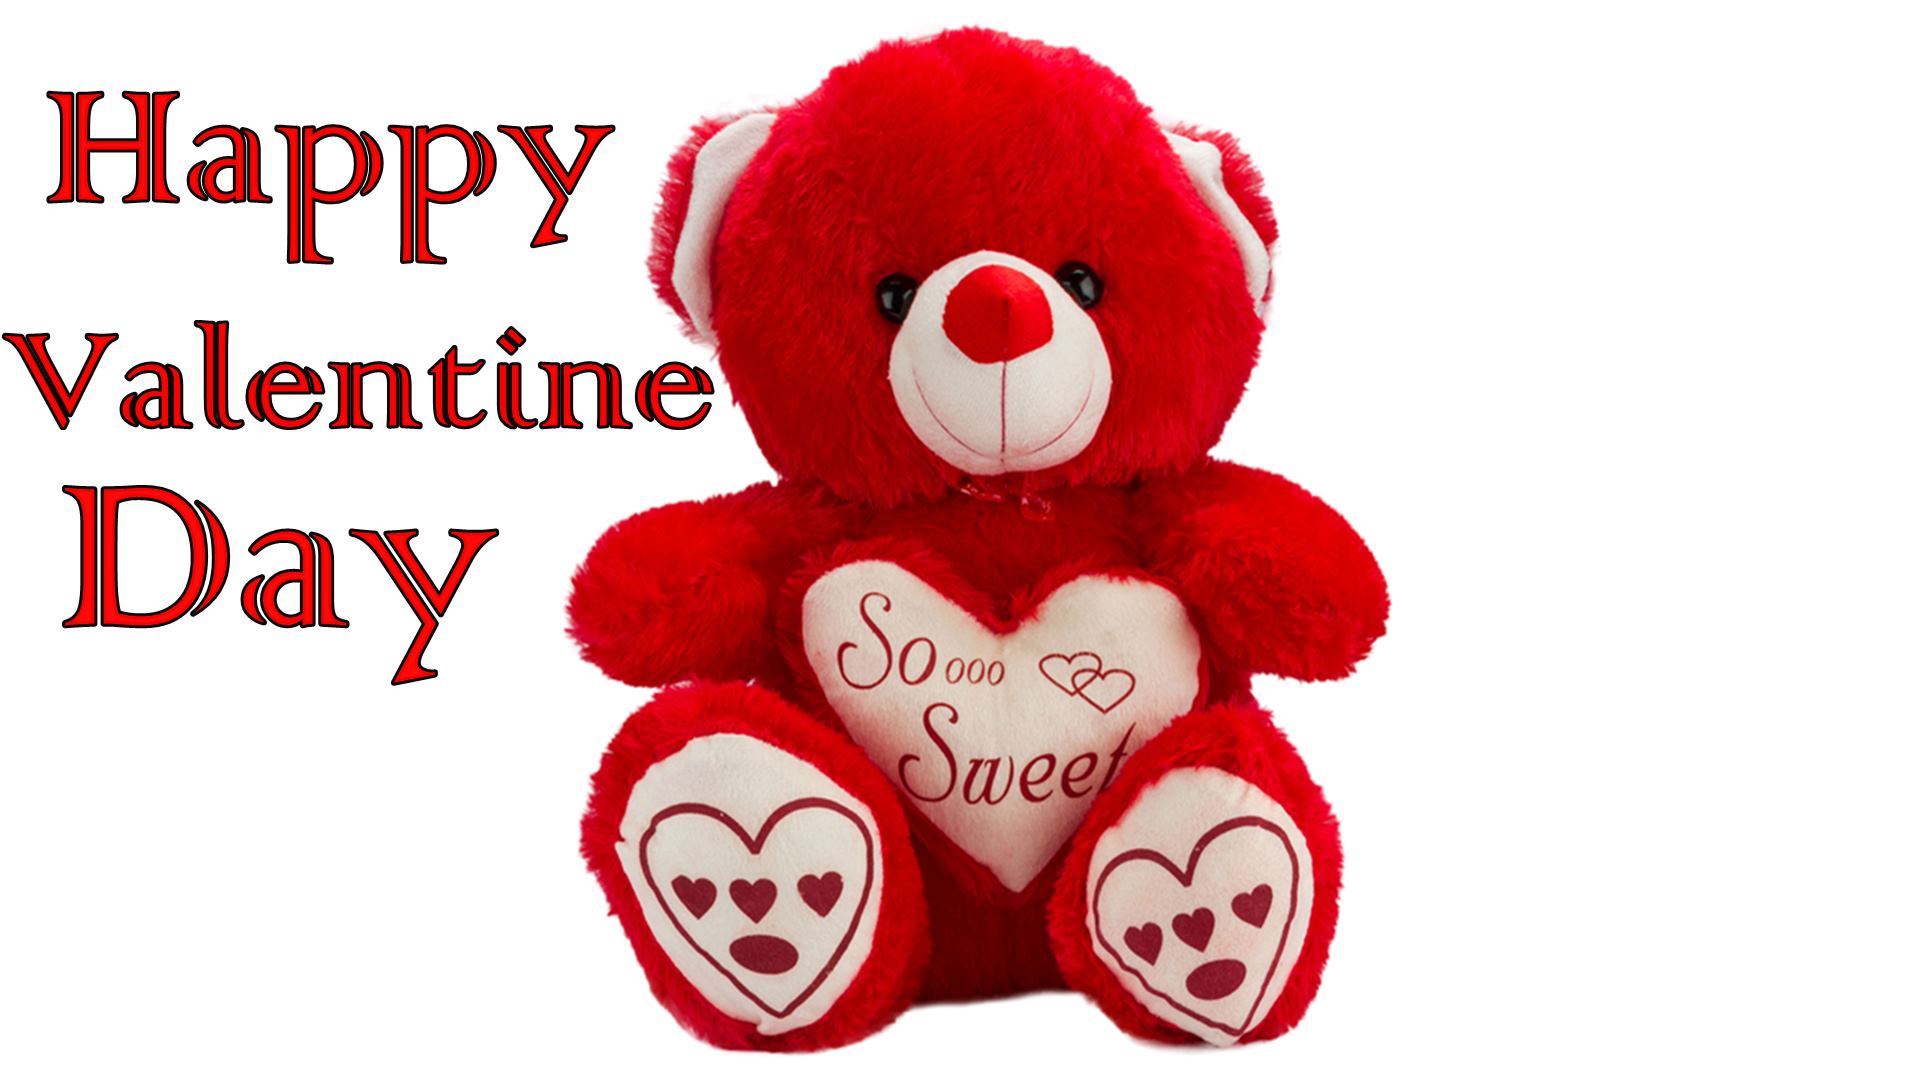 14th February Valentines Day Wishing Cards Image Pictures Biseworld